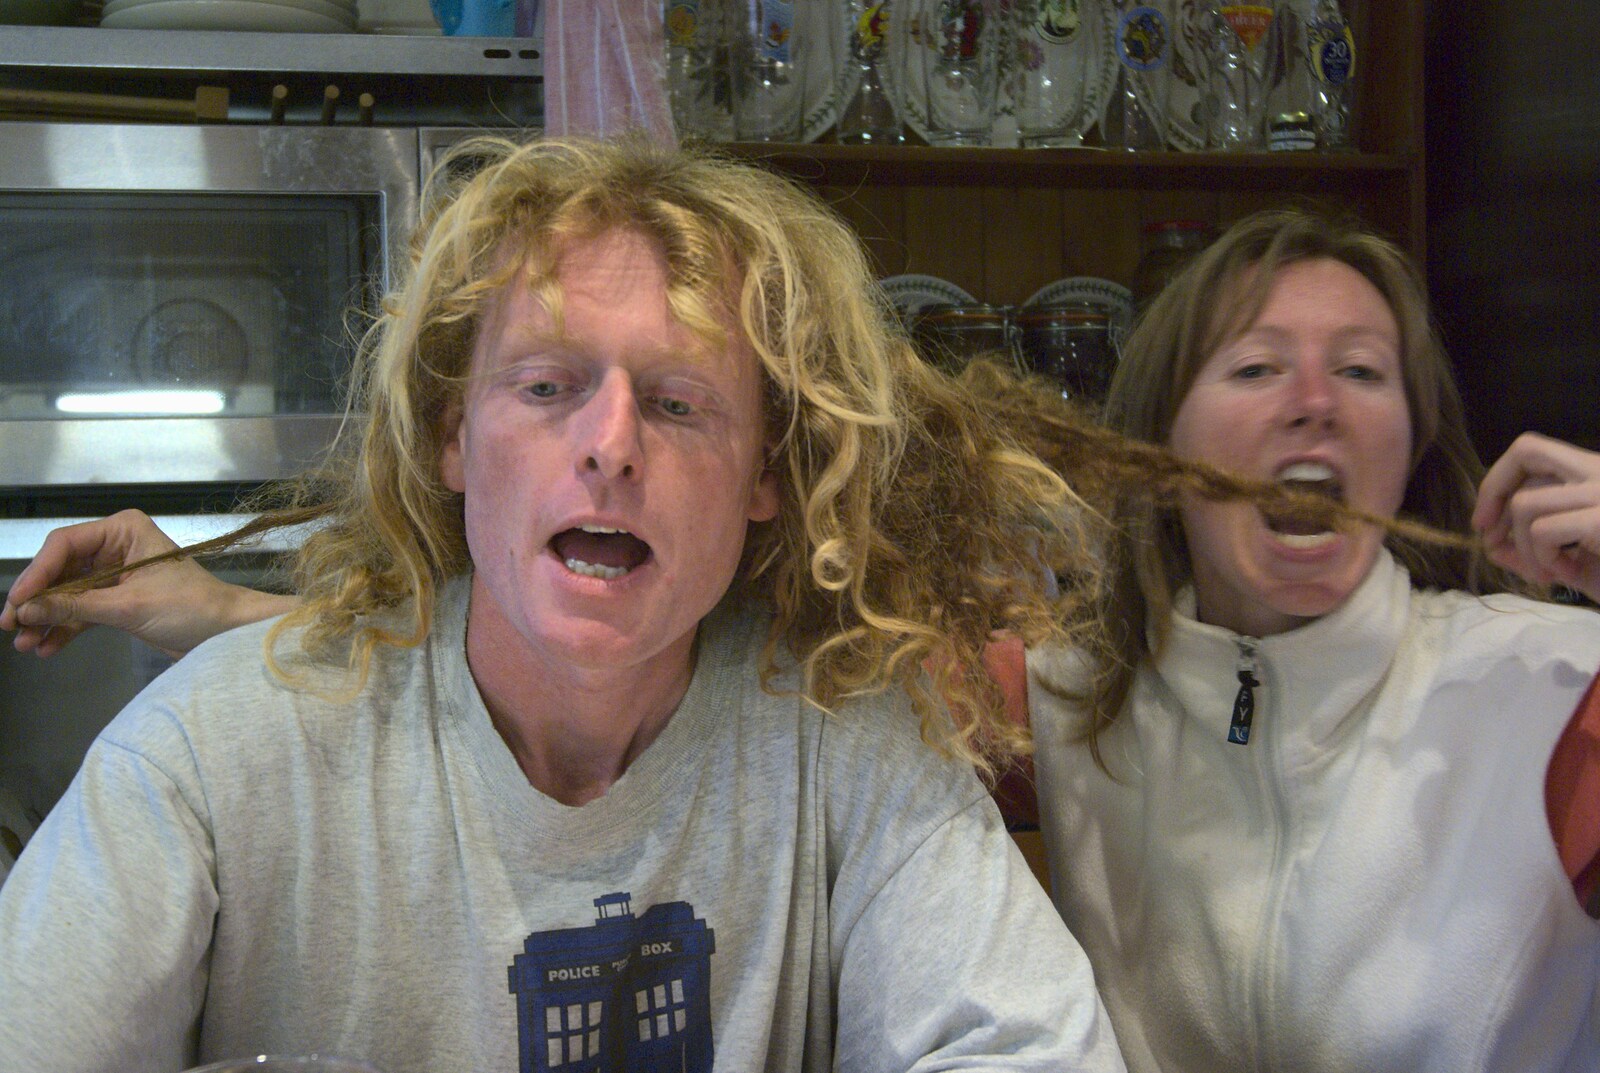 Martina eats one of Wavy's dreads from Lunch With Wavy and Martina, Brome, Suffolk - 18th April 2009